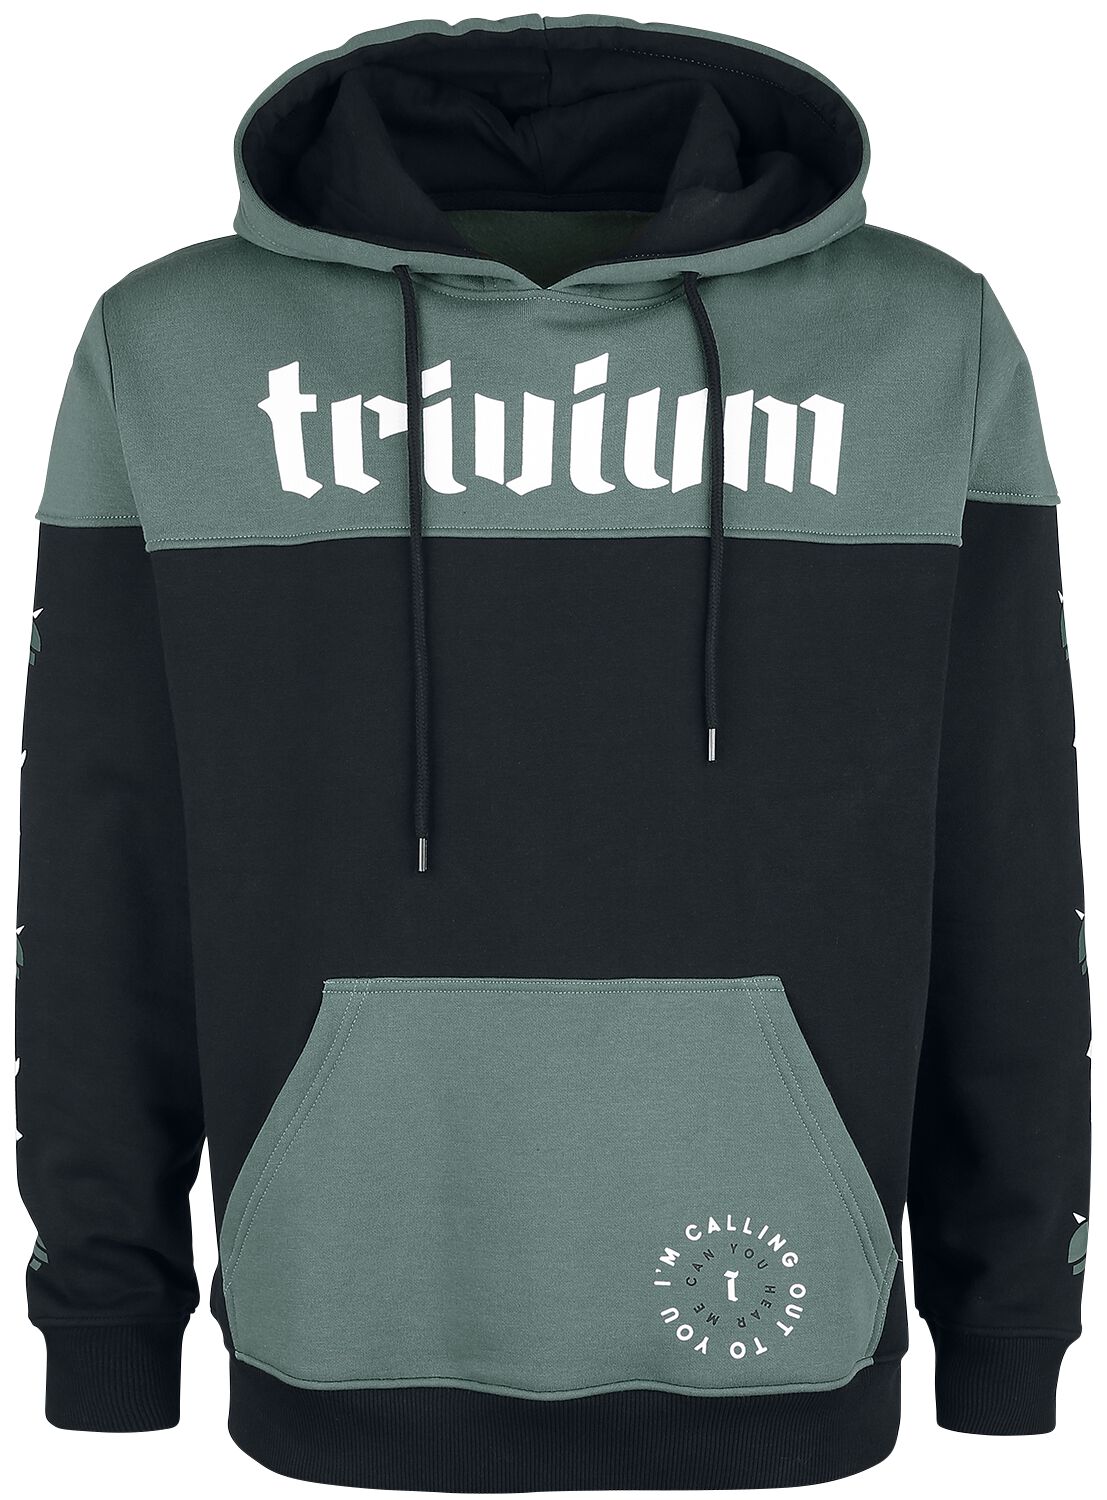 Trivium EMP Signature Collection Hooded sweater black green